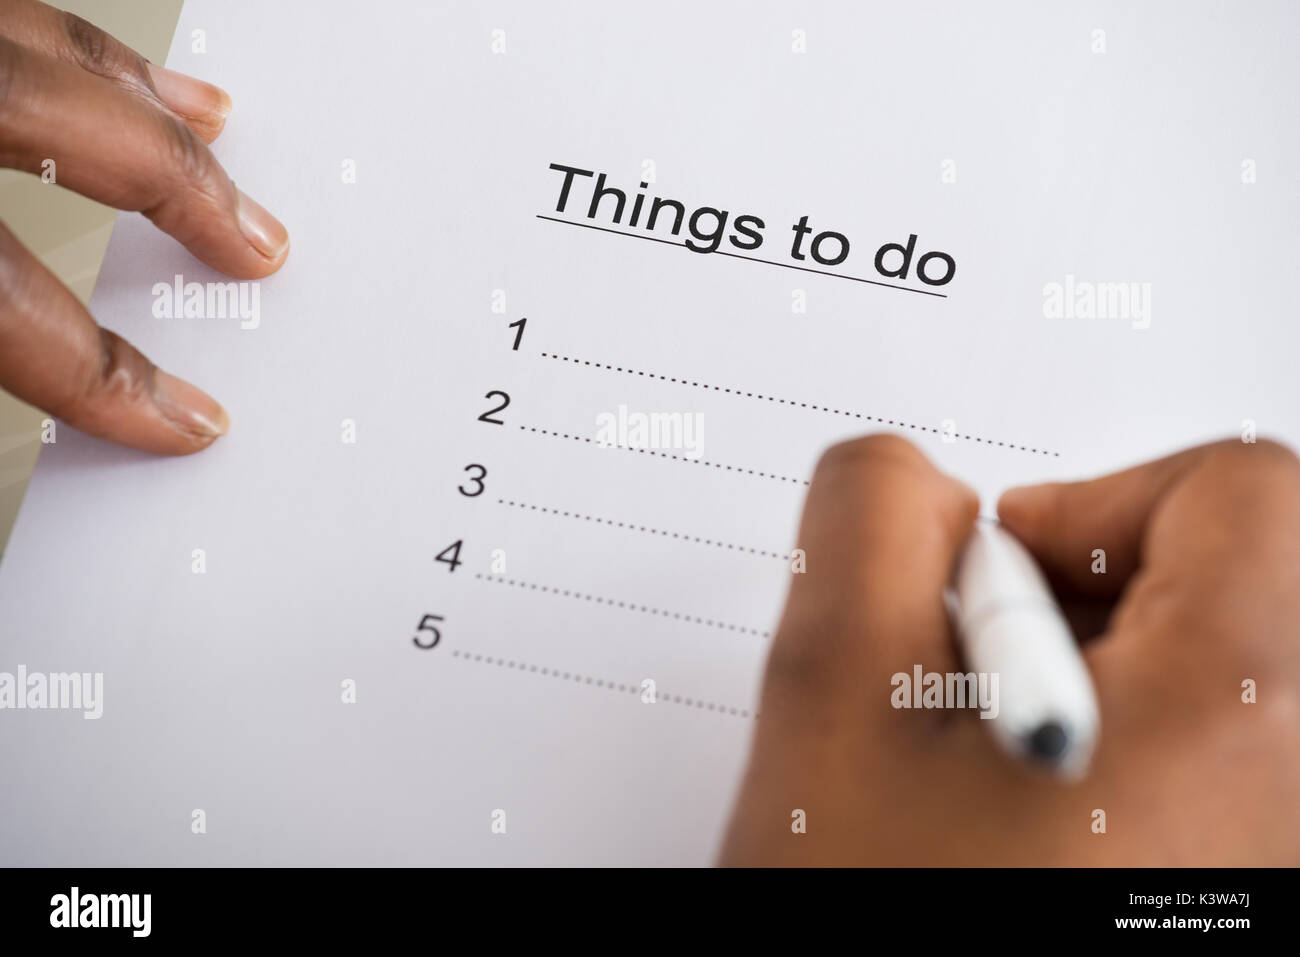 Close-up Of Person's Hand Writing Things To Do List On Paper Stock Photo